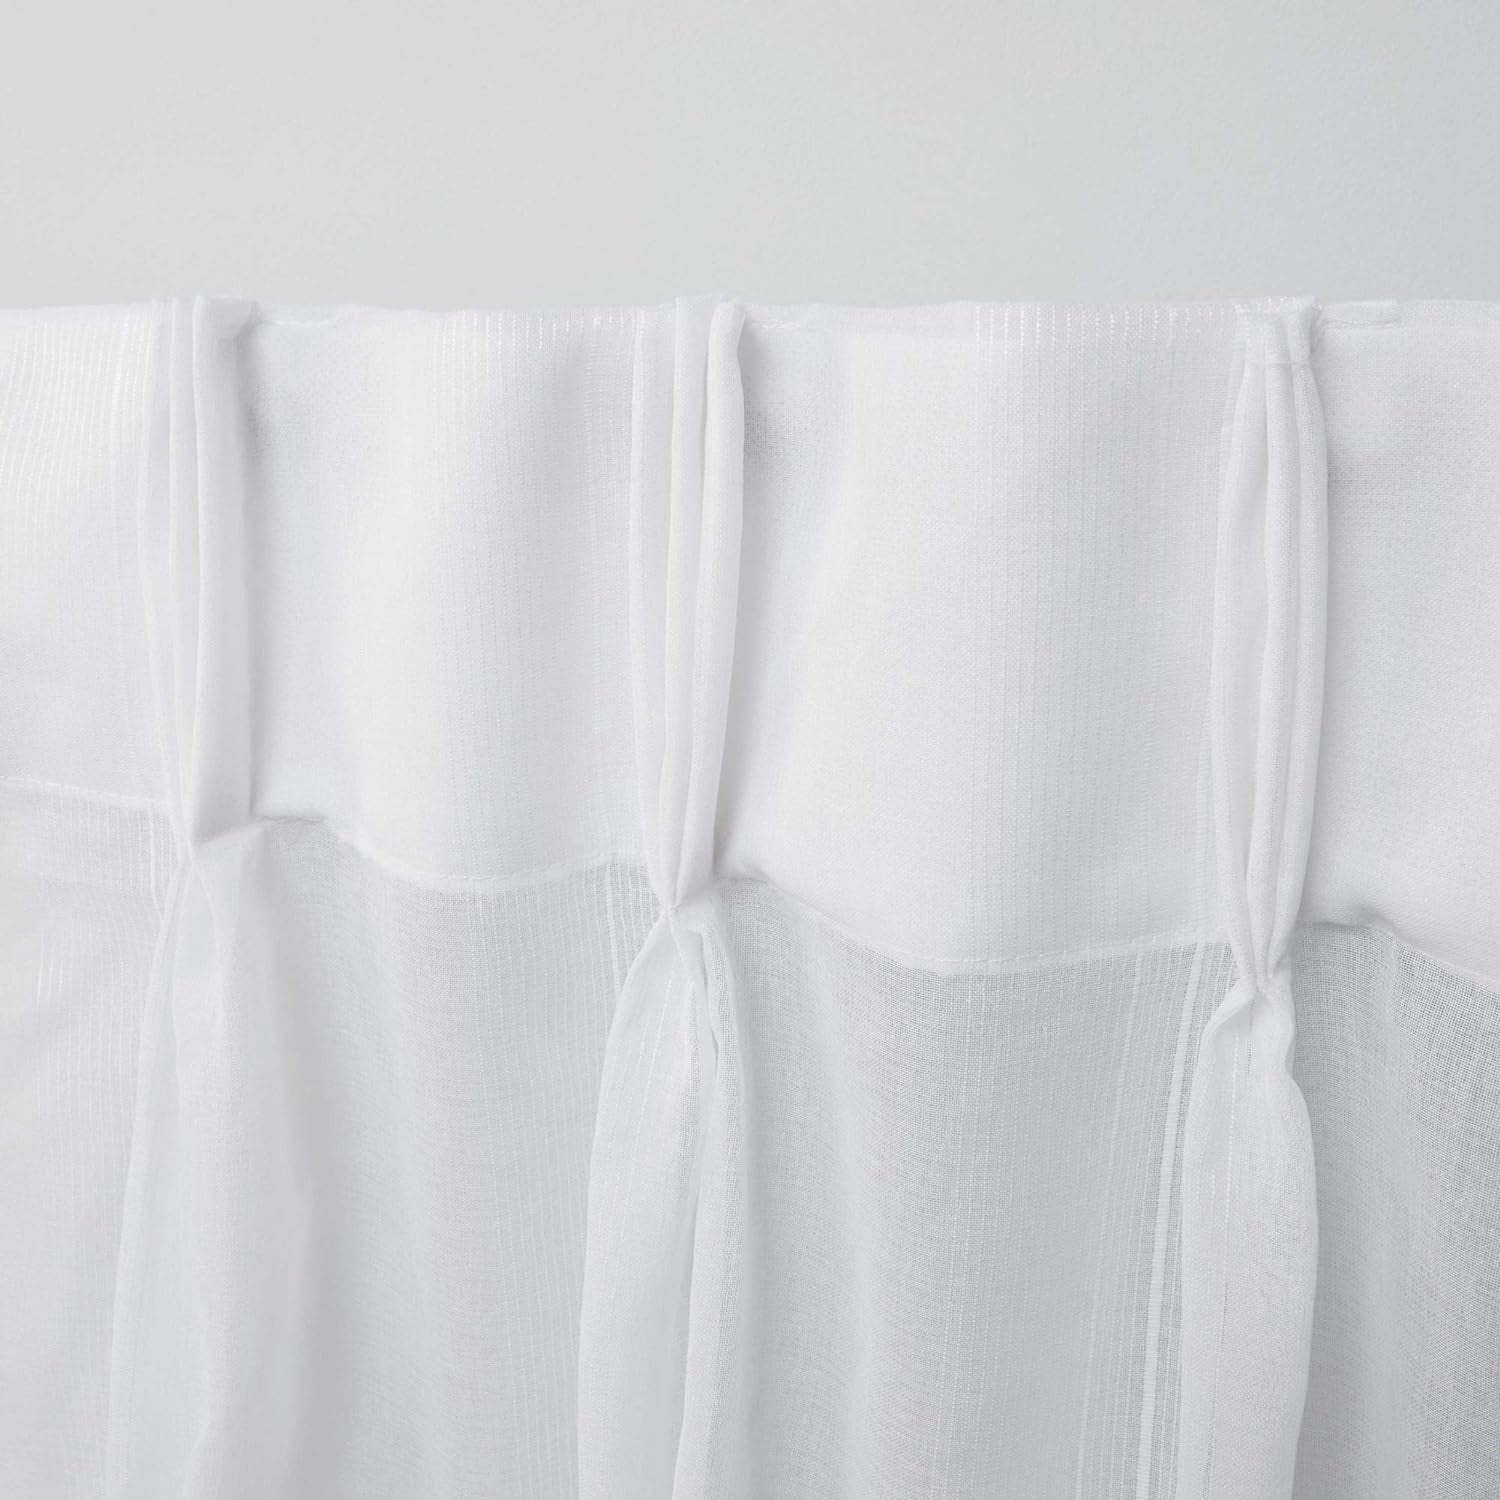 Exclusive Home Penny Sheer Embellished Stripe Grommet Top Curtain Panel Pair, 96" Length, Winter White  Exclusive Home Curtains   